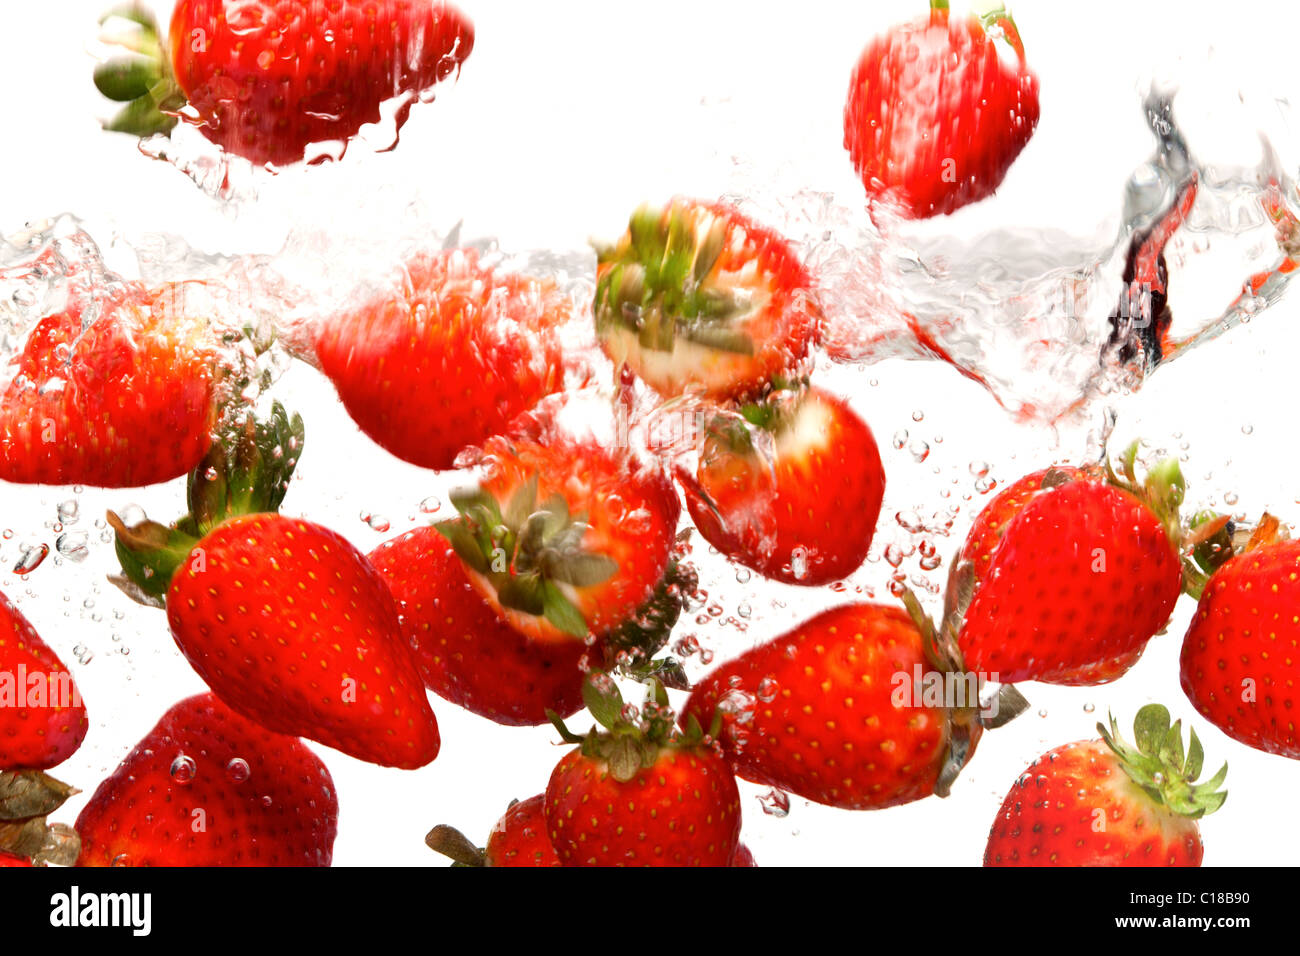 Photo of strawberries falling into water against a white background.Motion blur. Stock Photo